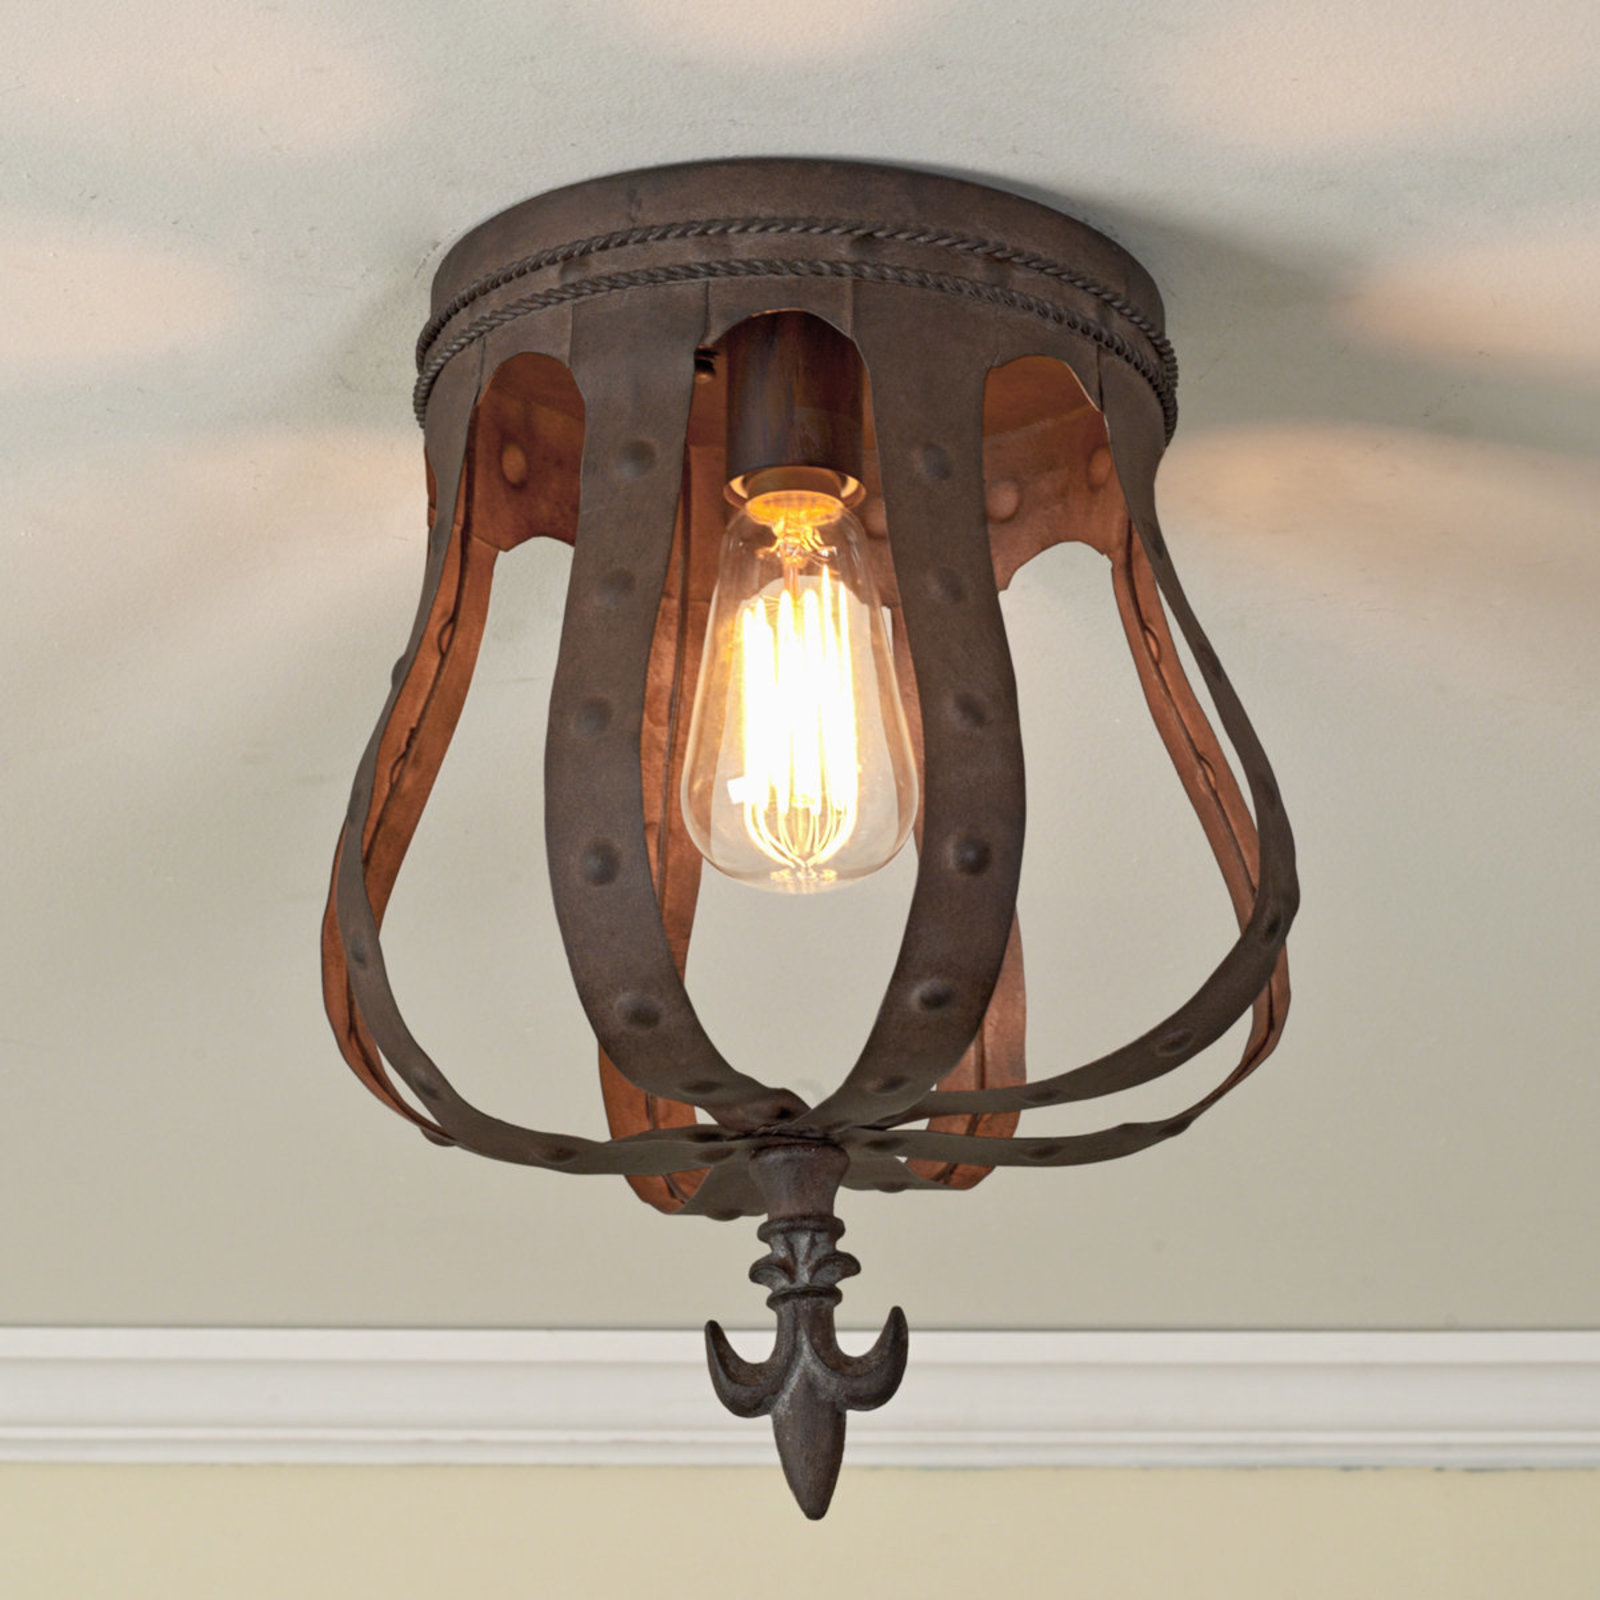 Rusty Crown Ceiling Light - Shades of Light